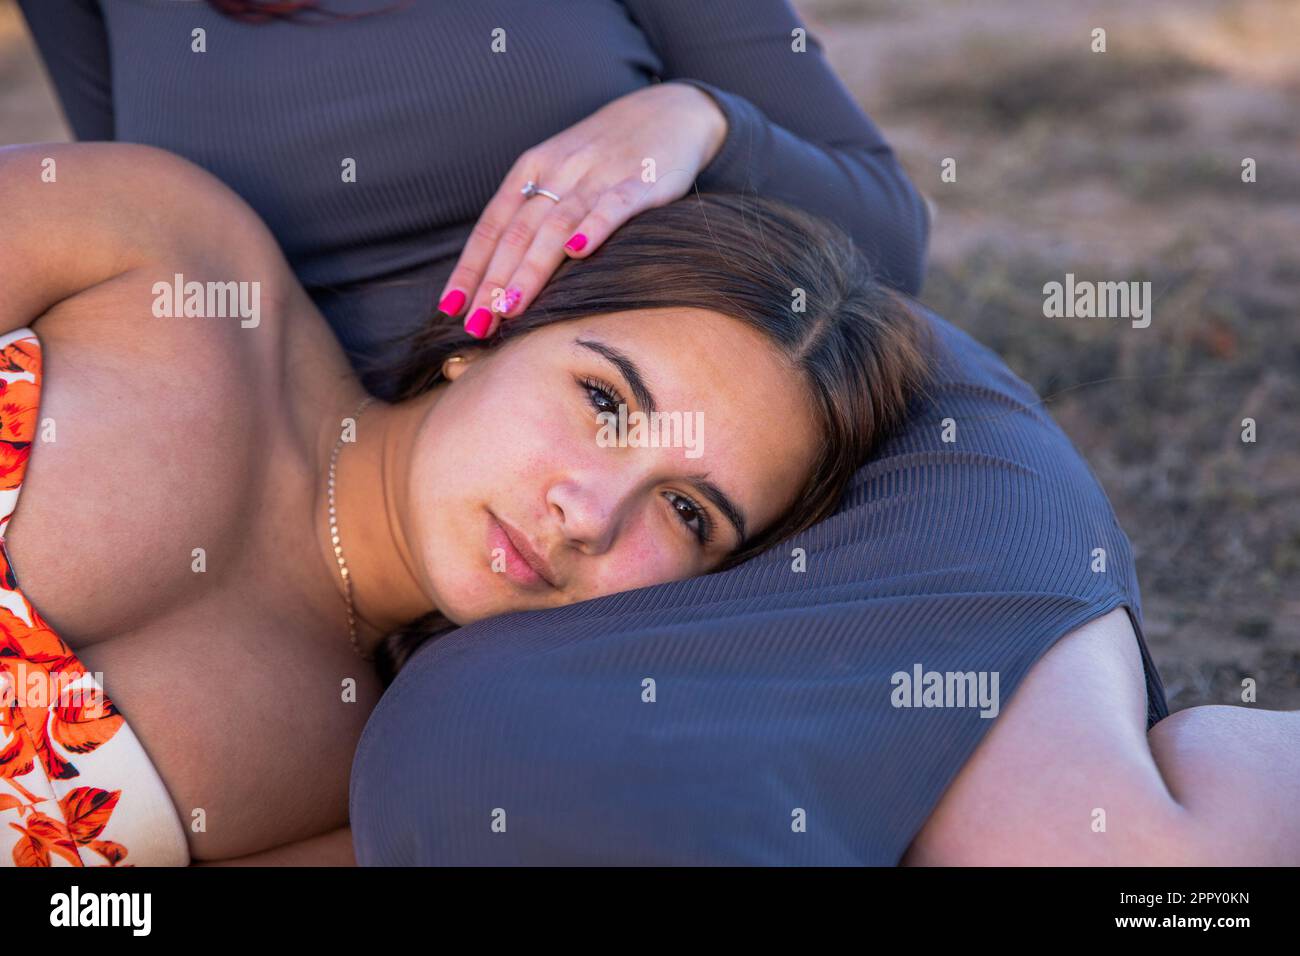 https://c8.alamy.com/comp/2PPY0KN/portrait-of-an-expressive-teenage-girl-resting-her-head-on-her-sisters-legs-2PPY0KN.jpg